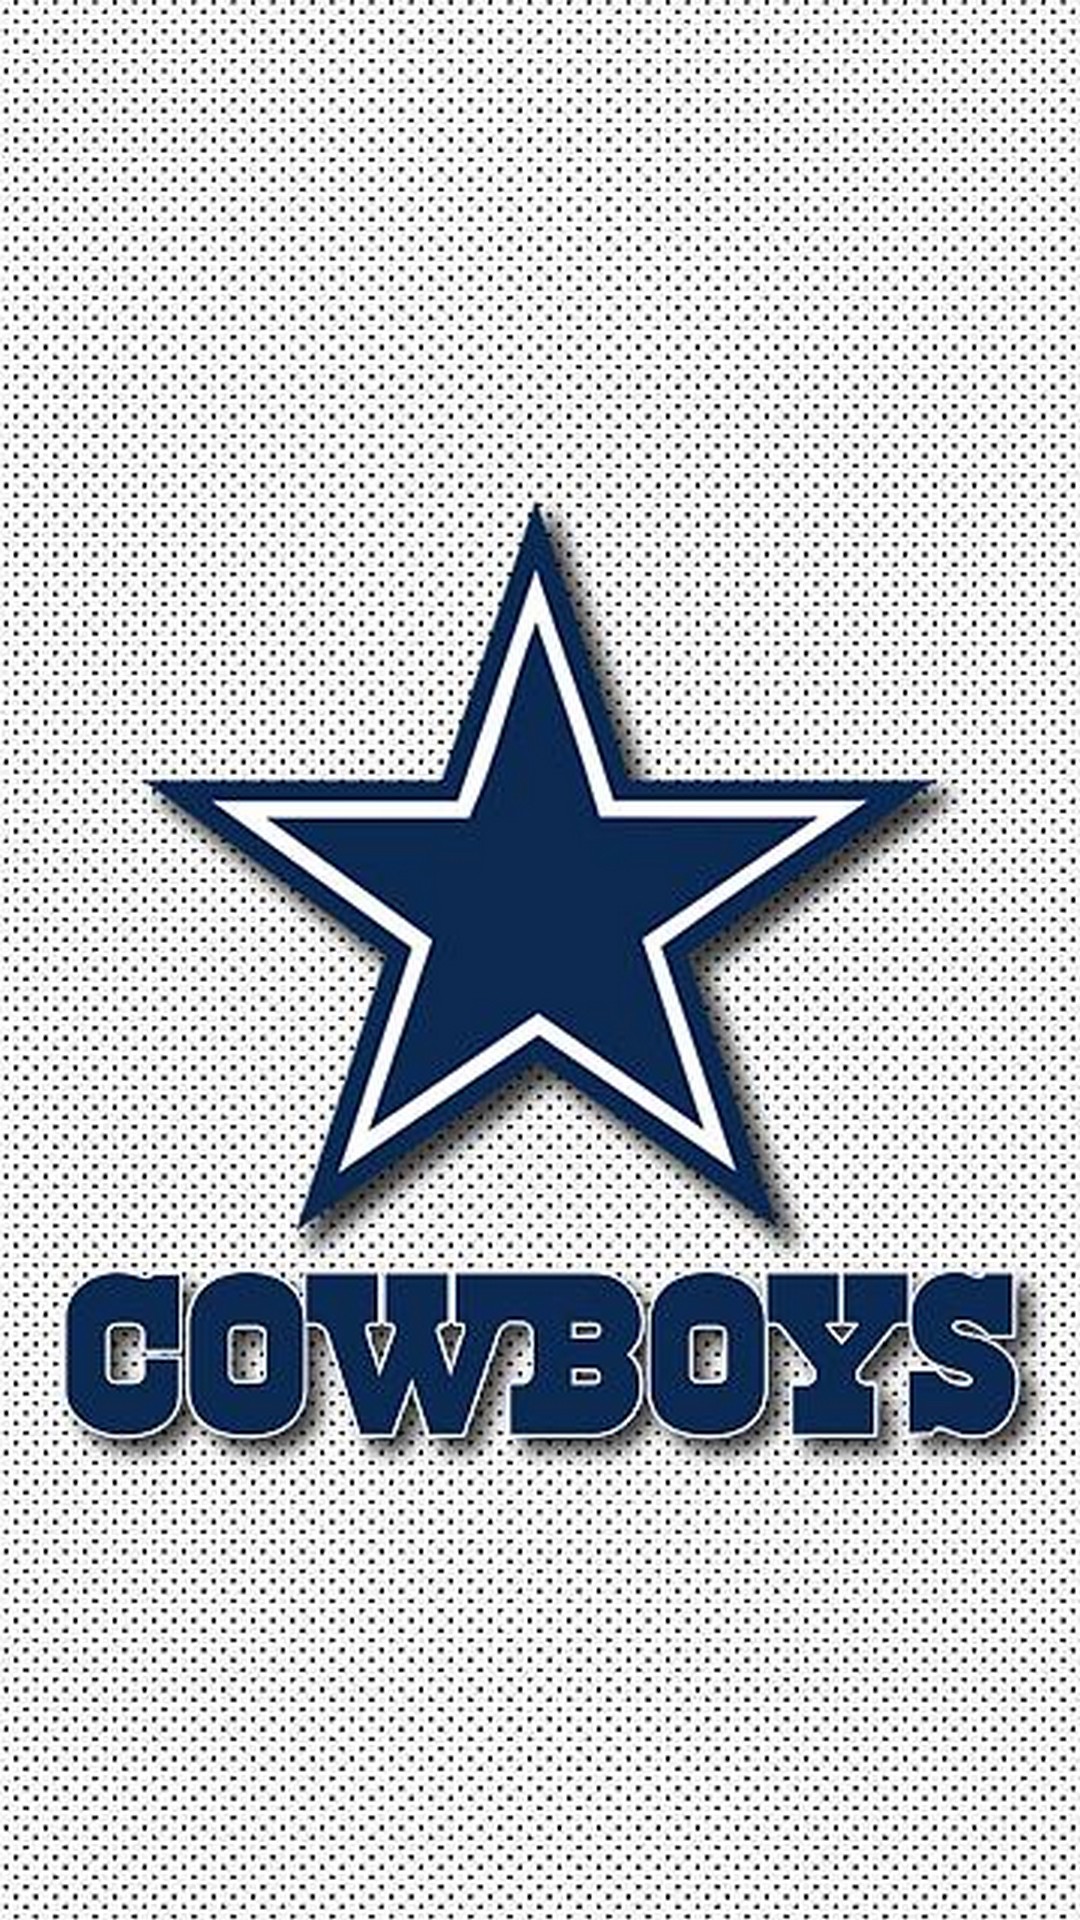 Dallas Cowboys iPhone Wallpaper Tumblr with high-resolution 1080x1920 pixel. Download and set as wallpaper for Apple iPhone X, XS Max, XR, 8, 7, 6, SE, iPad, Android